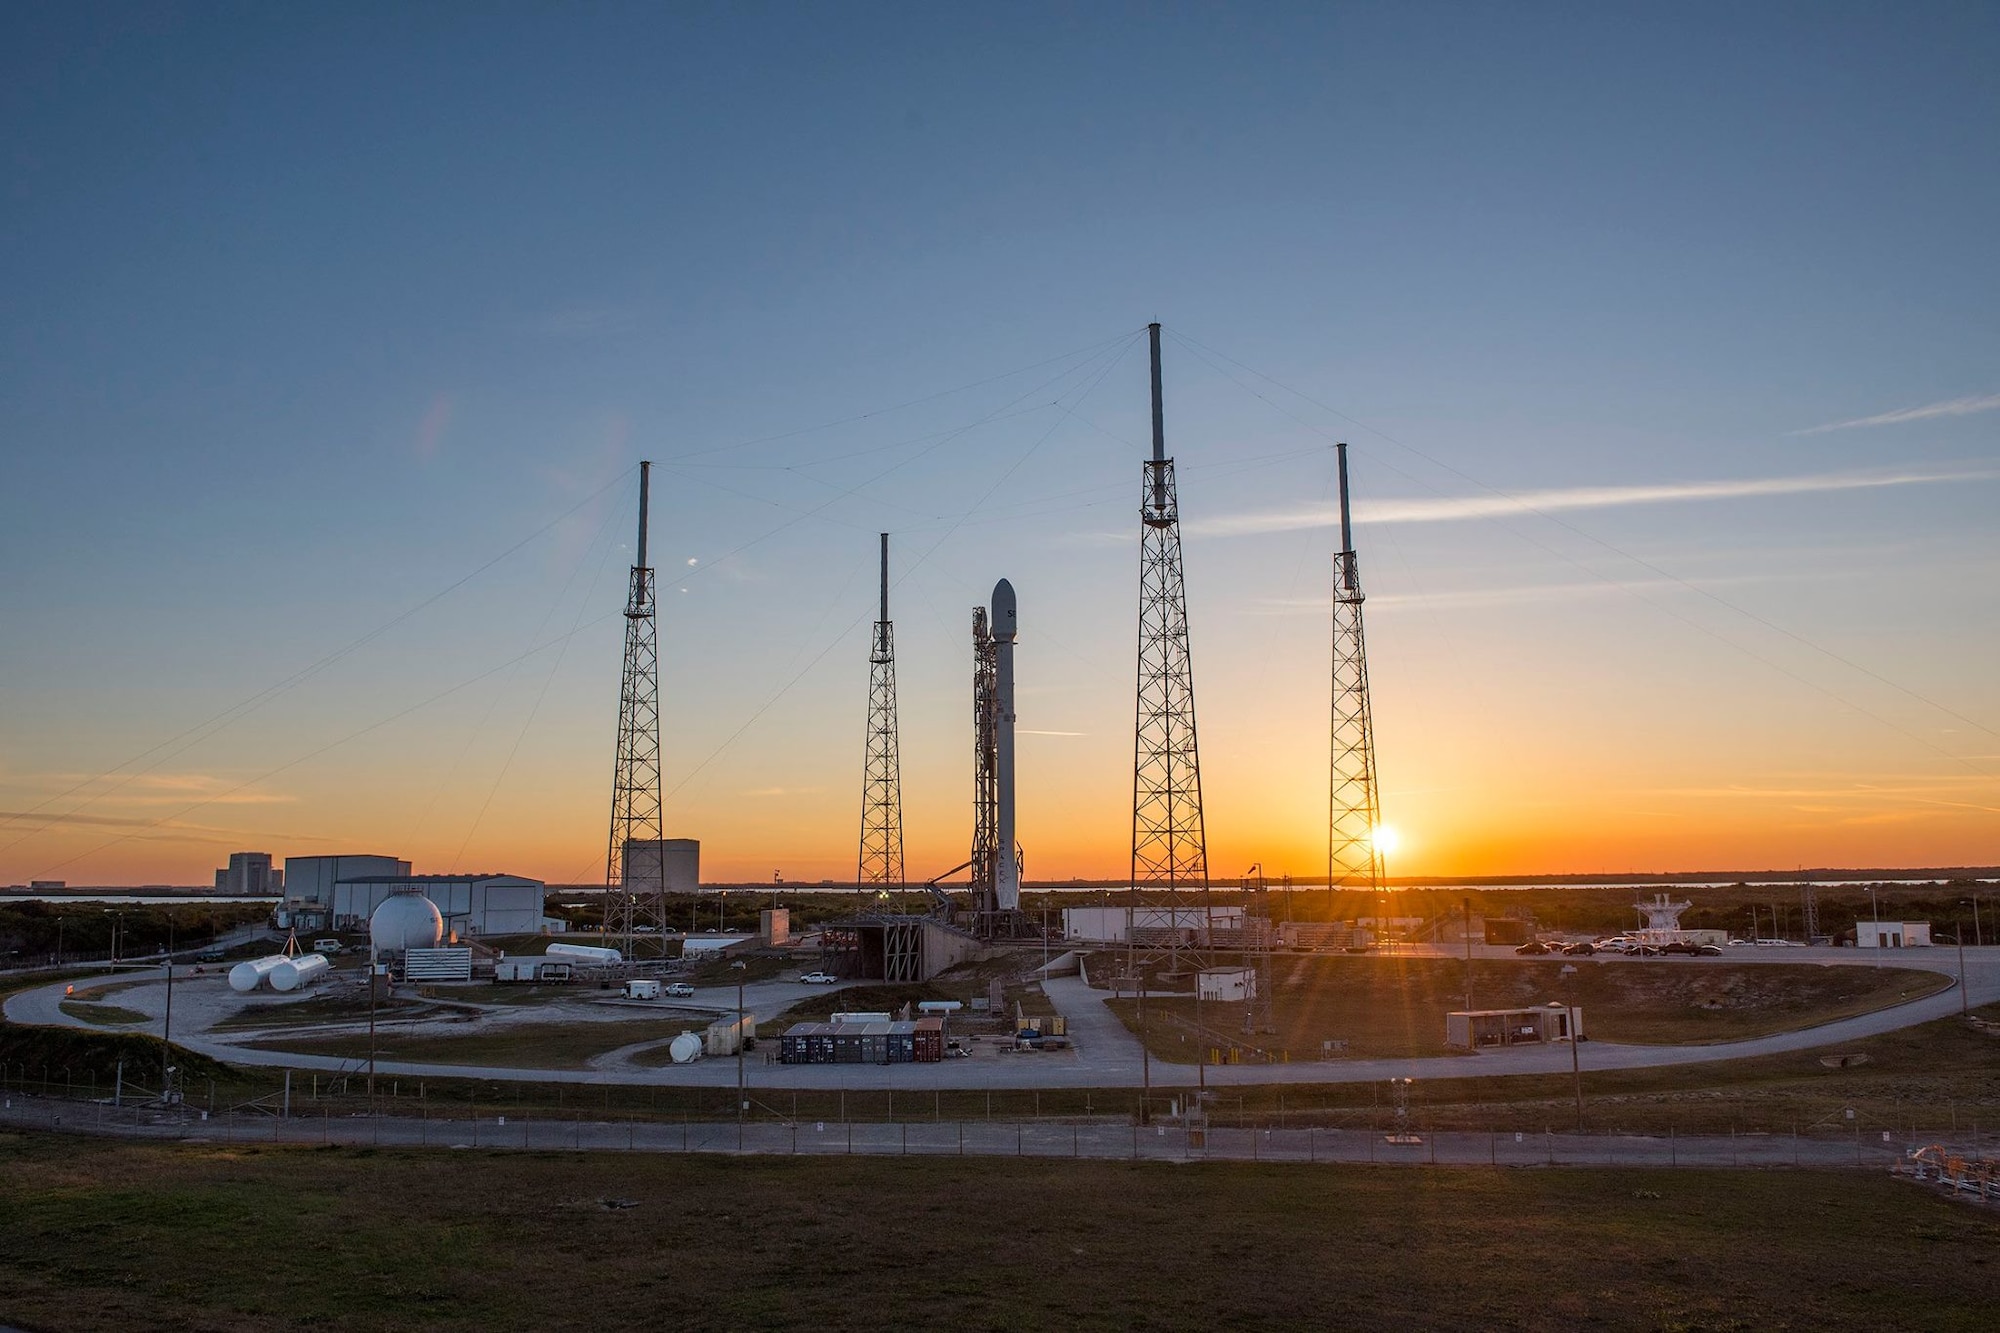 The U.S. Air Force’s 45th Space Wing supported the SpaceX Falcon 9 launch of the SES-9 communications satellite March 4, 2016, at 6:35 p.m. EST from Launch Complex 40 here. The satellite increases SES’s global video capabilities in Asia, Indonesia and the Philippines, and is also designed to deliver reliable data connectivity across Asia while providing support to growing mobility communications needs across the Indian Ocean, according to an SES release. (Courtesy photo by SpaceX)